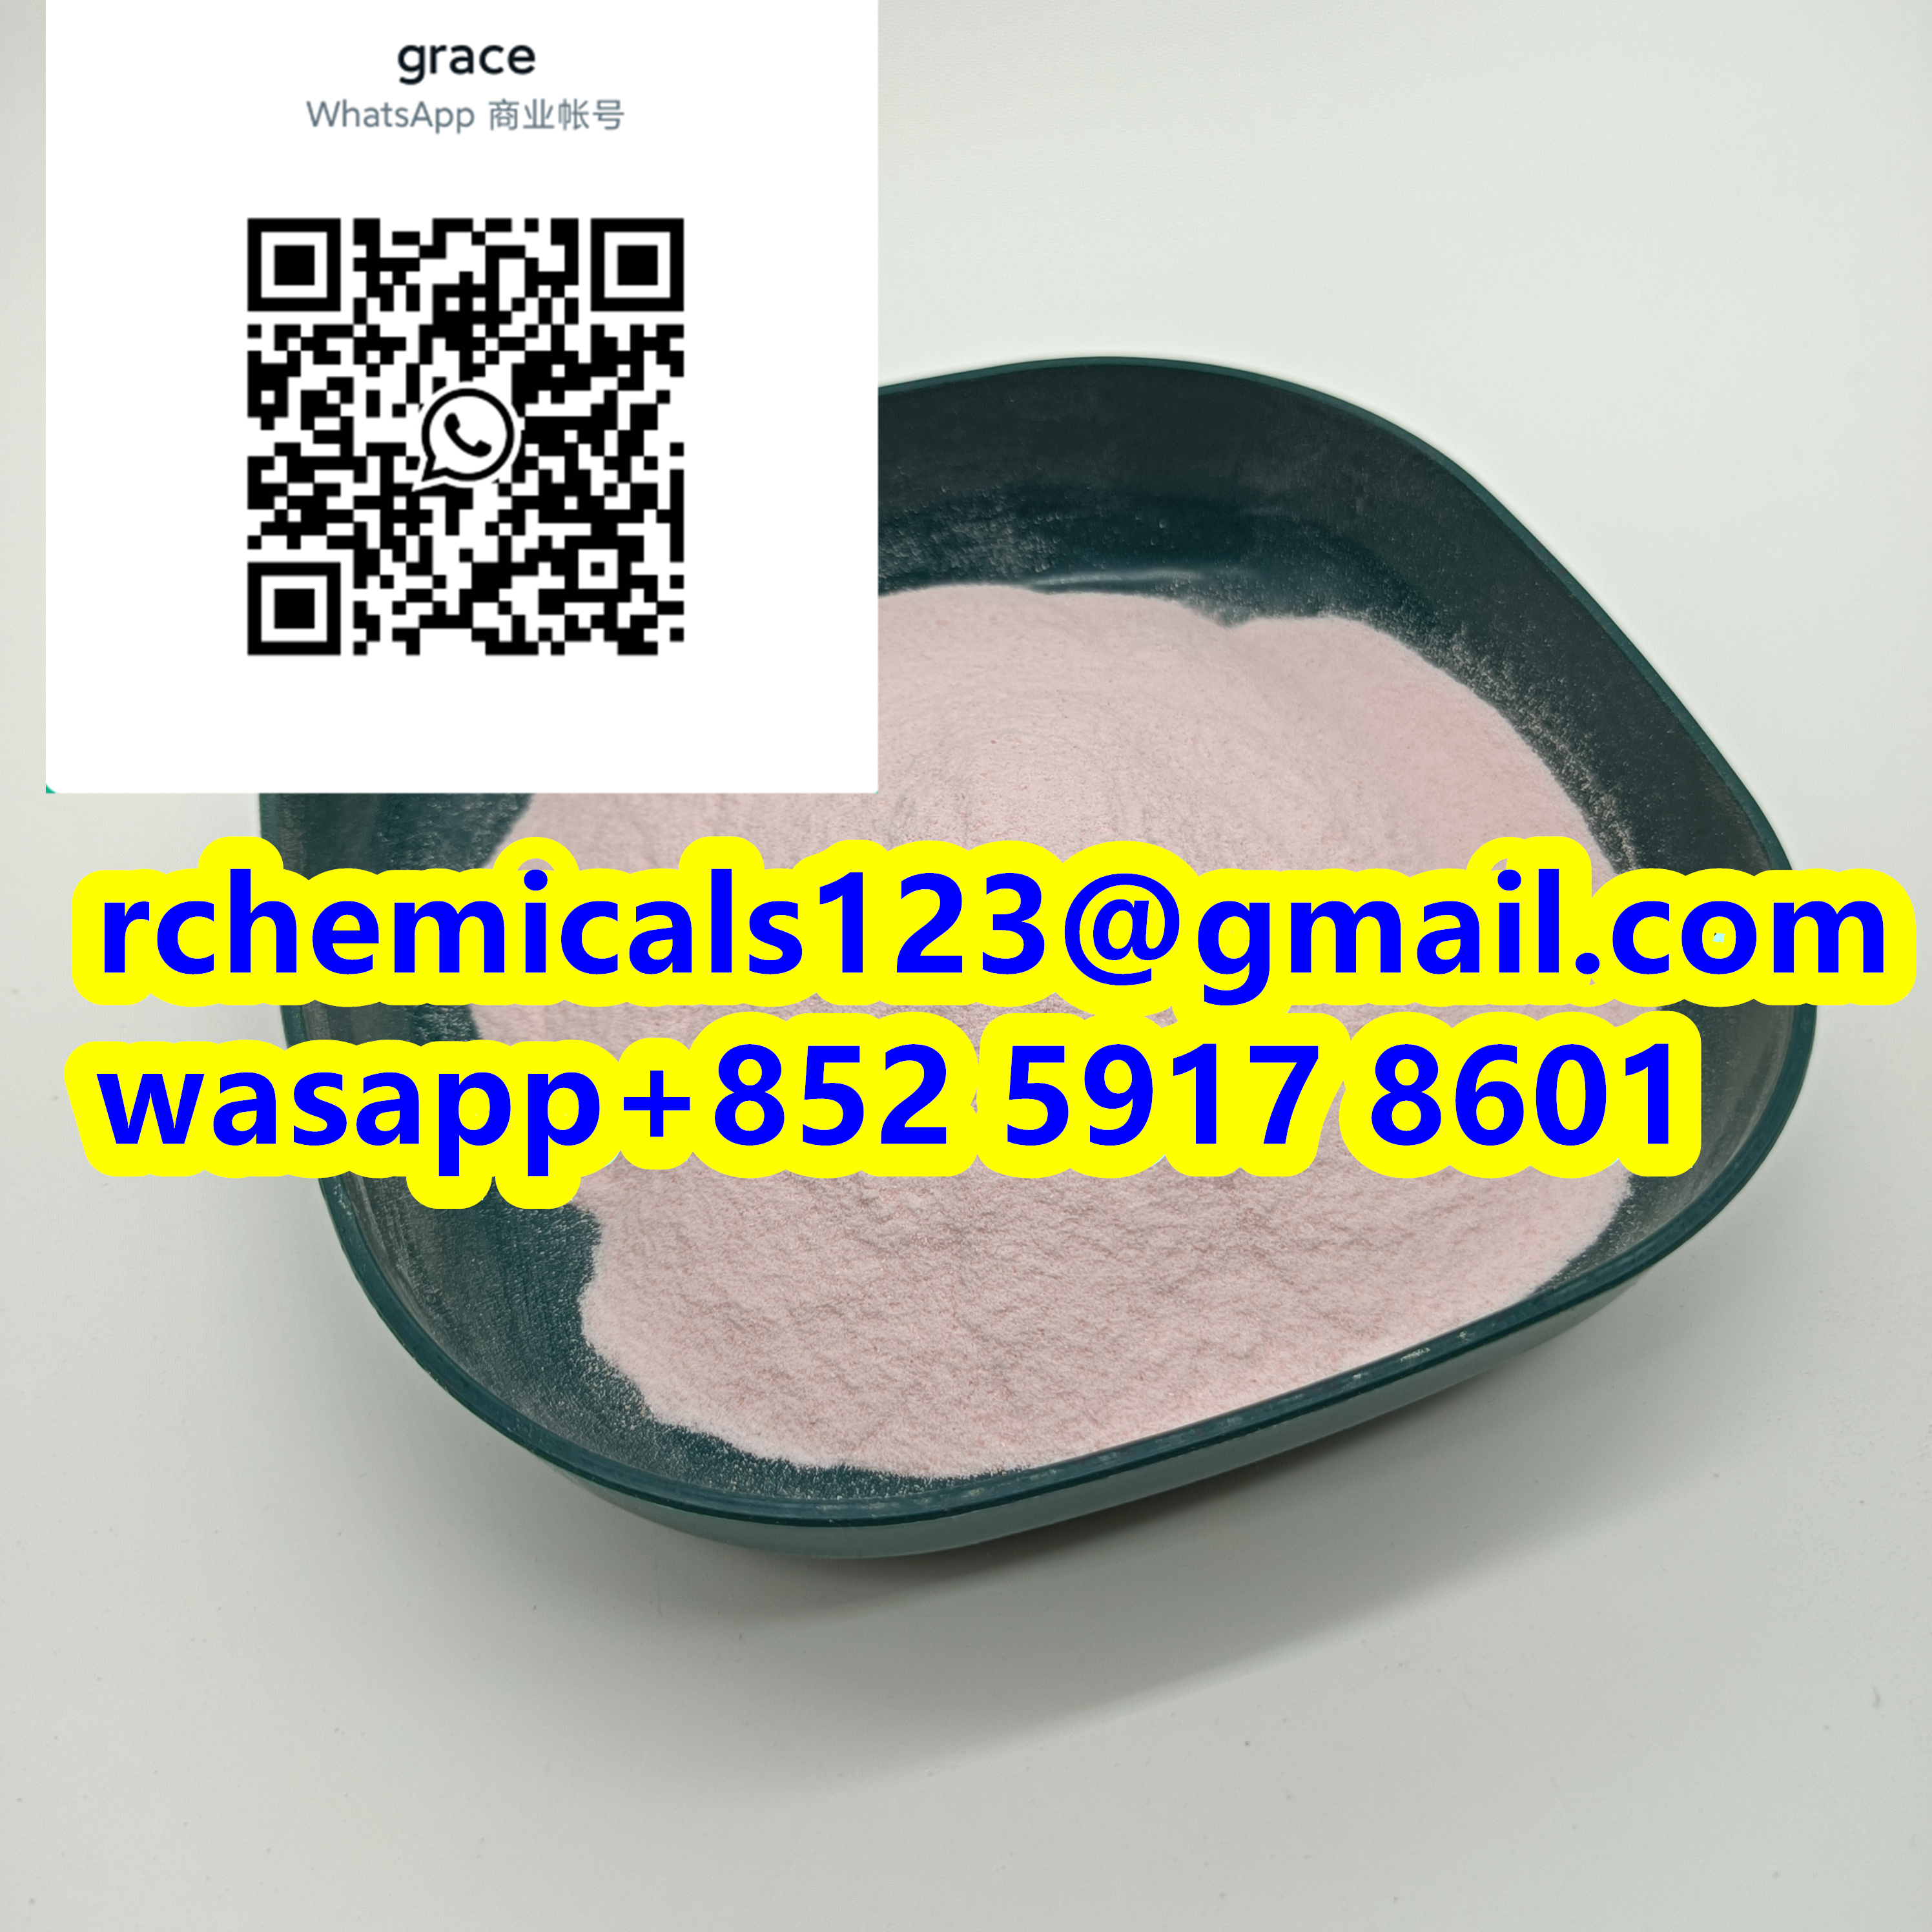 Bromazolam CAS 71368-80-4 (wasapp+852 5917 8601),hk,Services,Free Classifieds,Post Free Ads,77traders.com